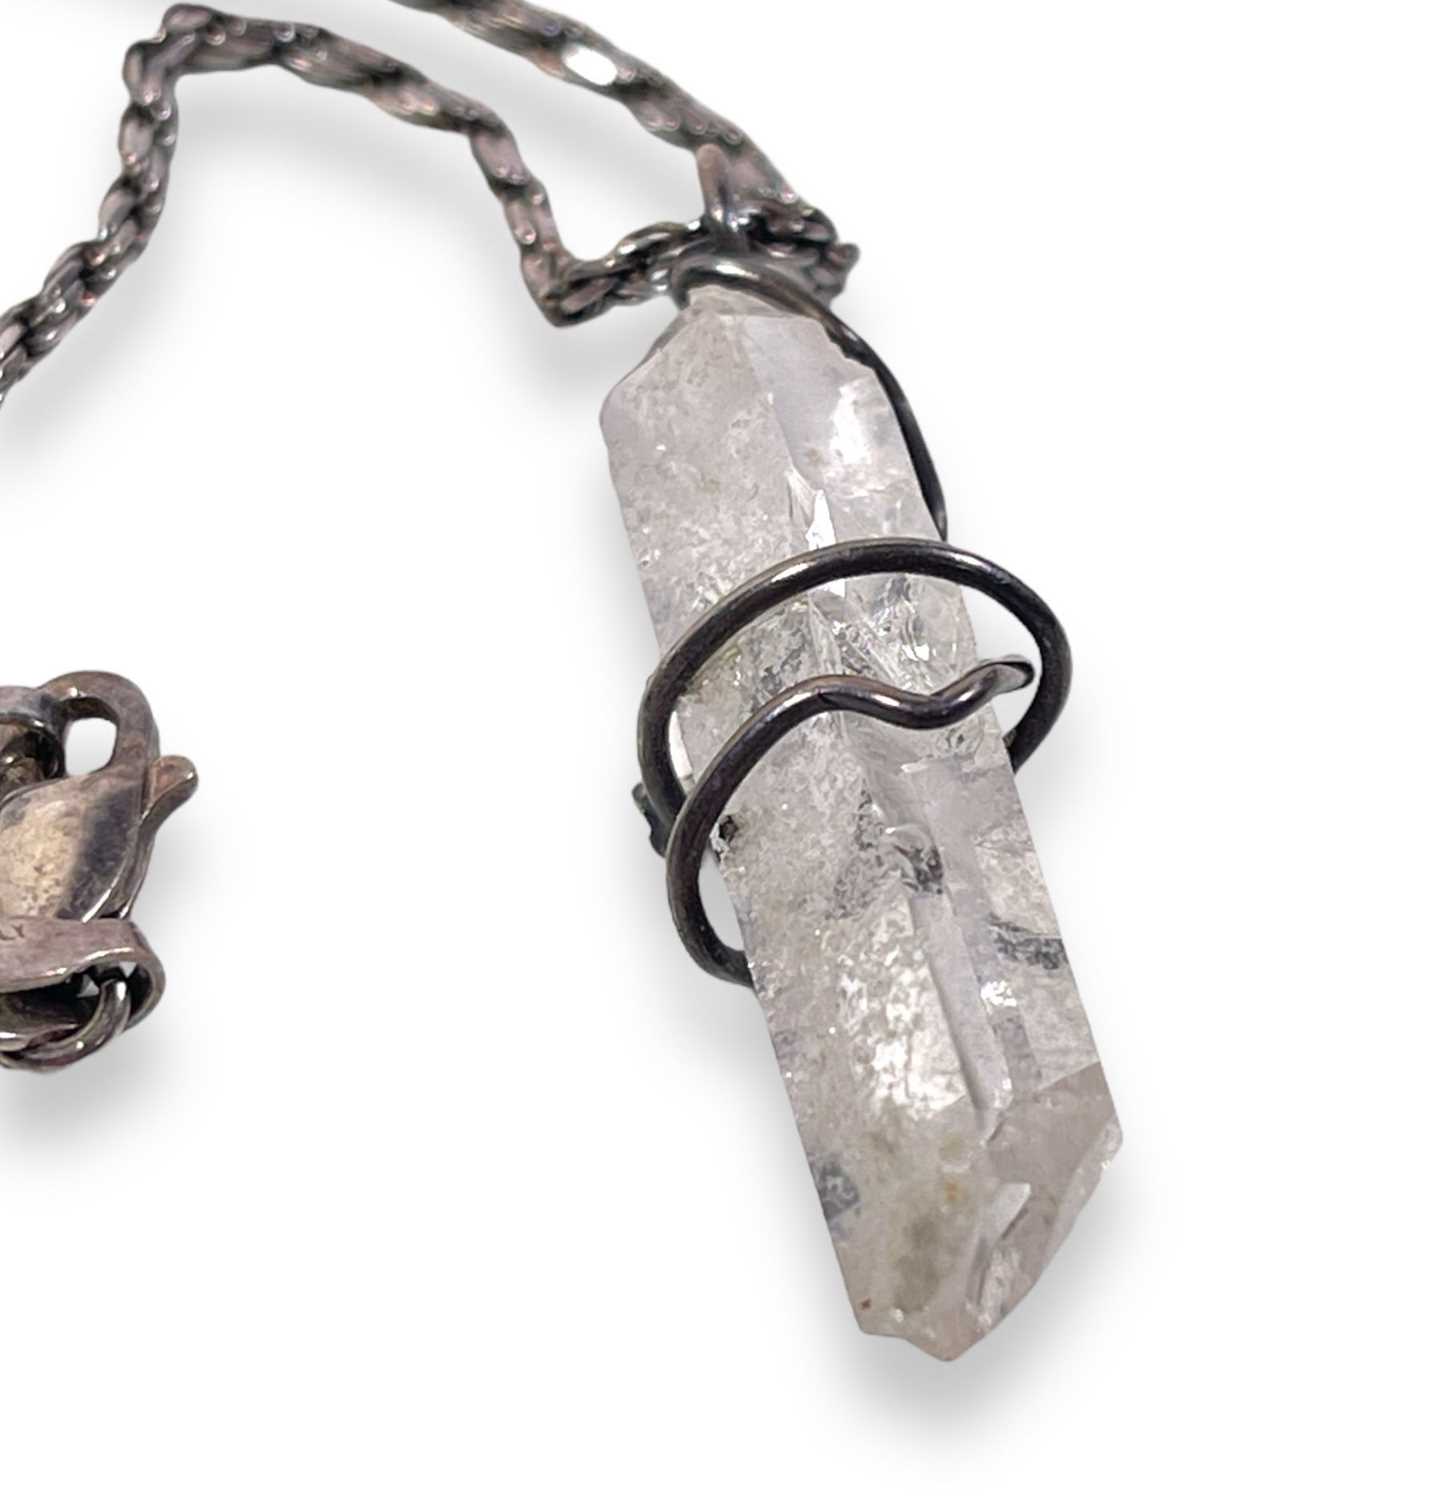 JIMI HENDRIX - OWNED AND WORN QUARTZ NECKLACE. - Image 2 of 4